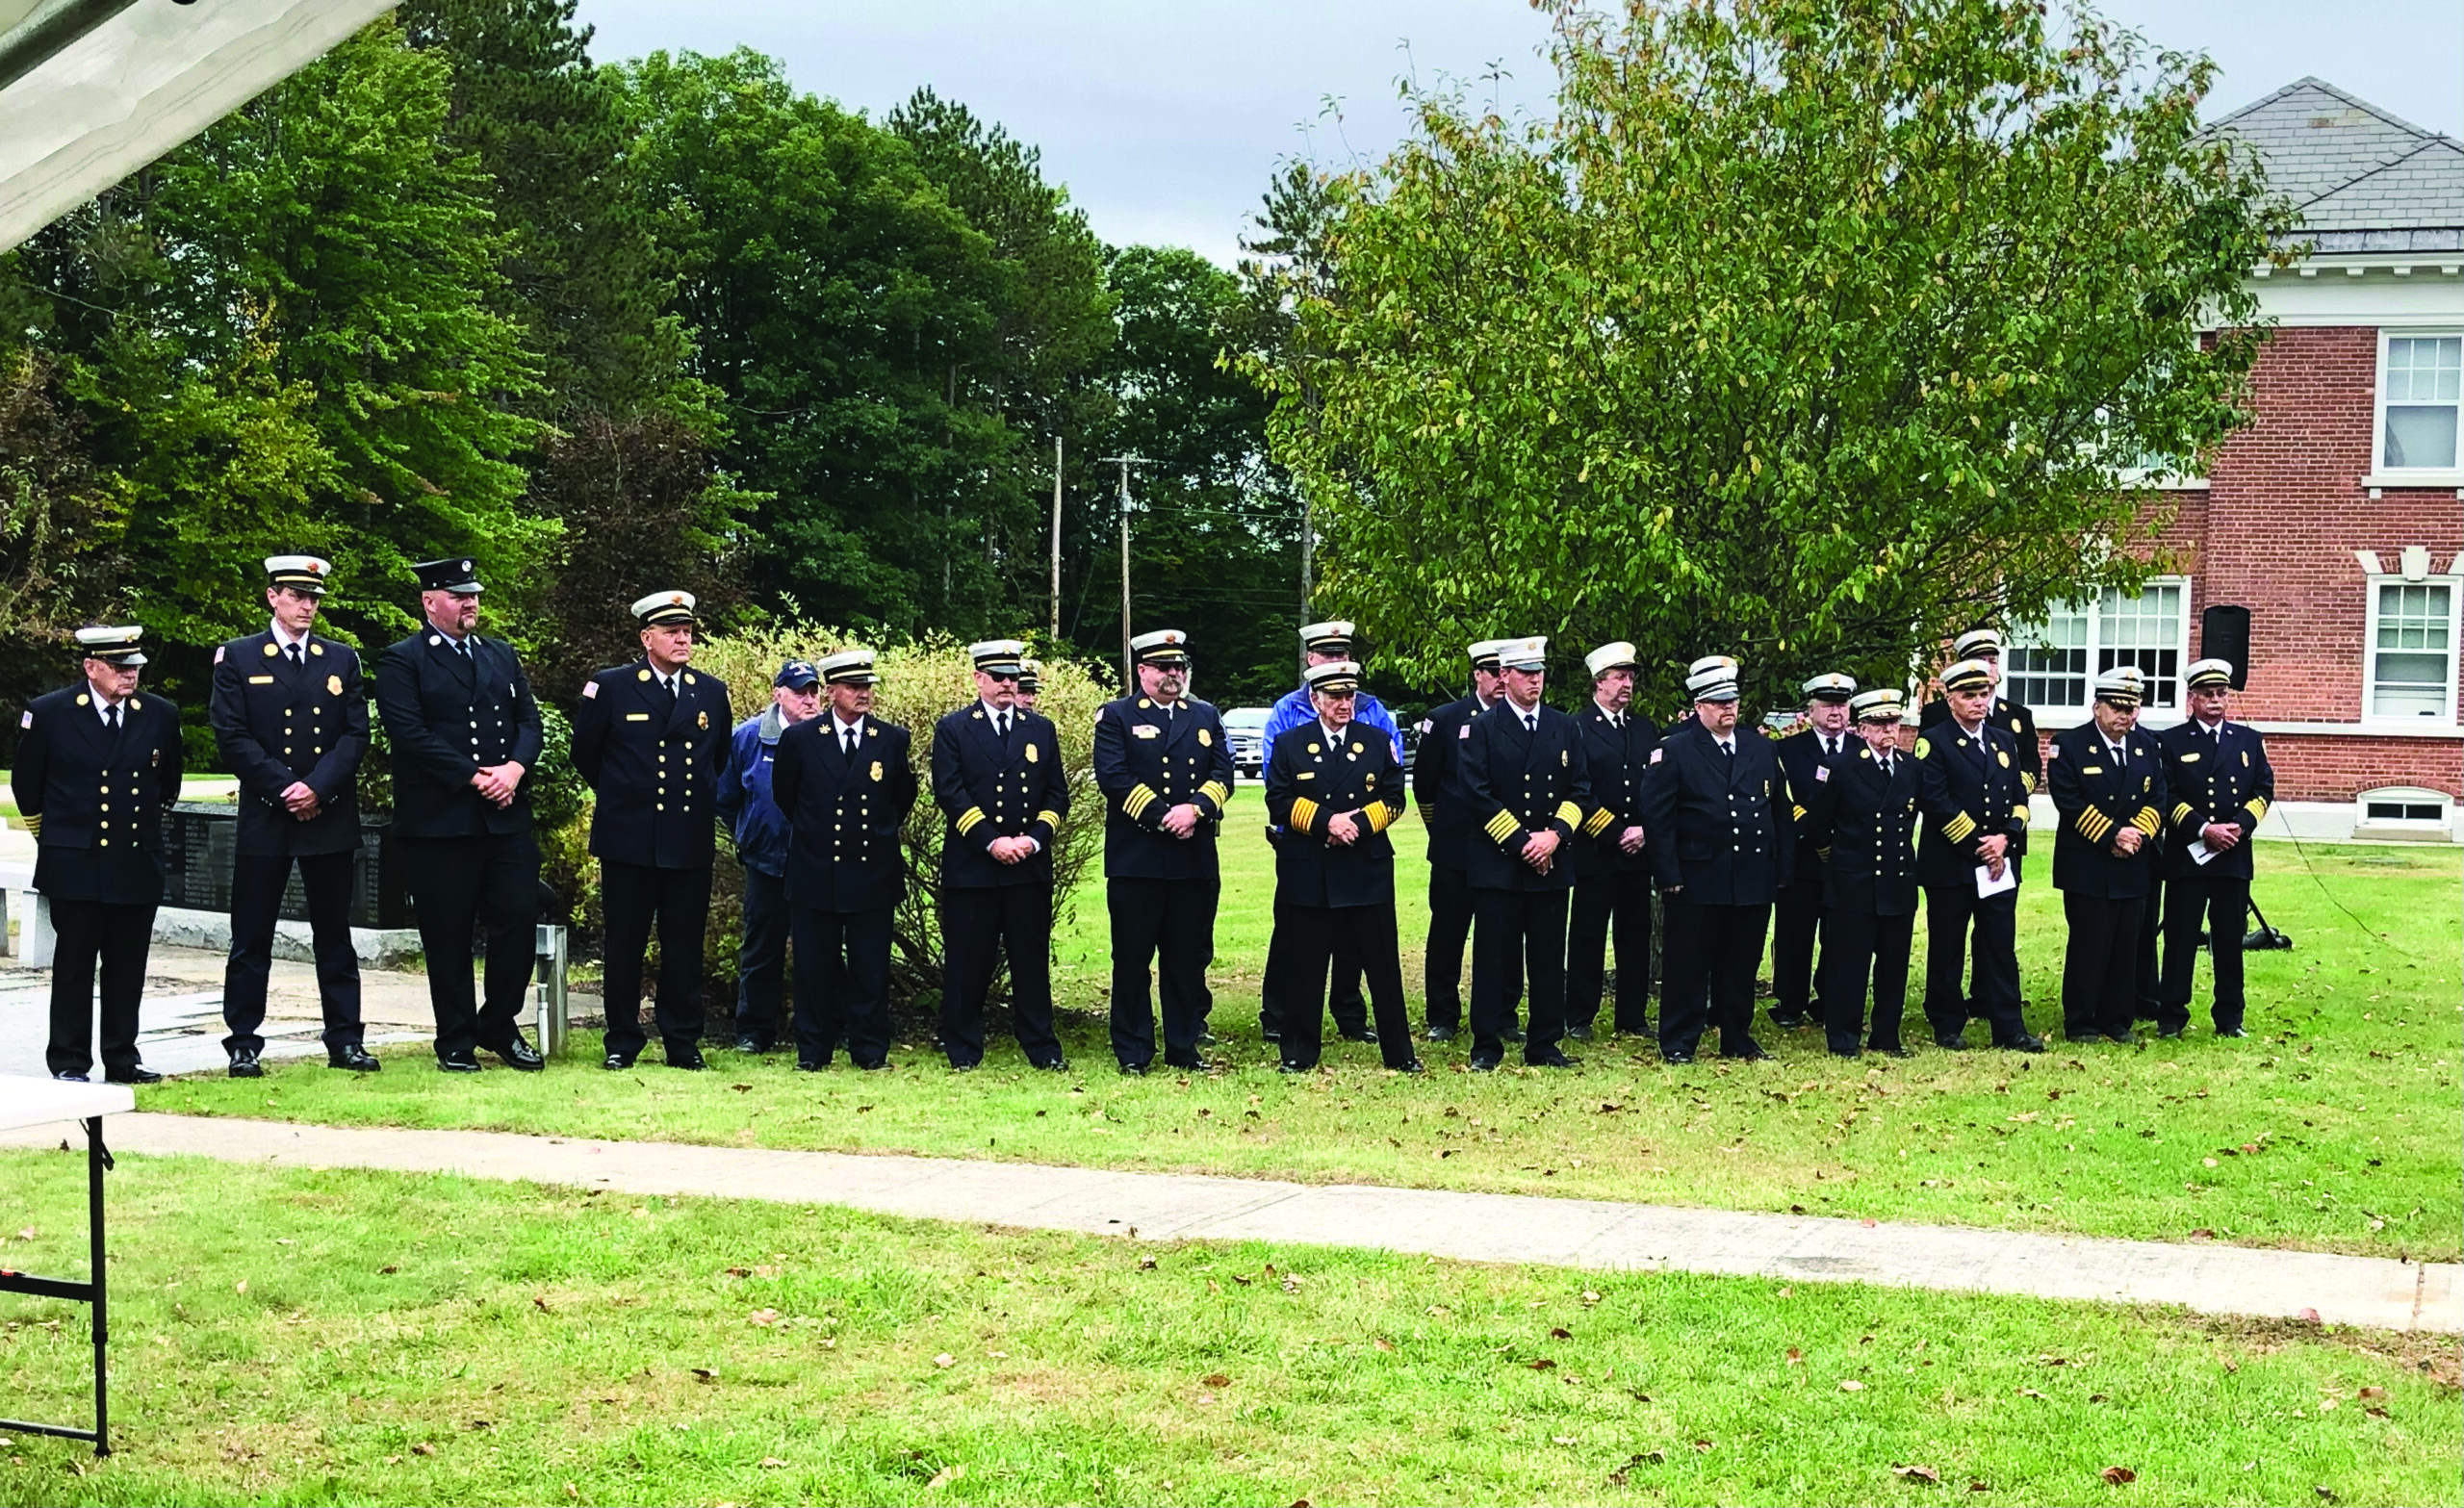 Remembrance ceremony for Vermont’s Emergency Service Workers